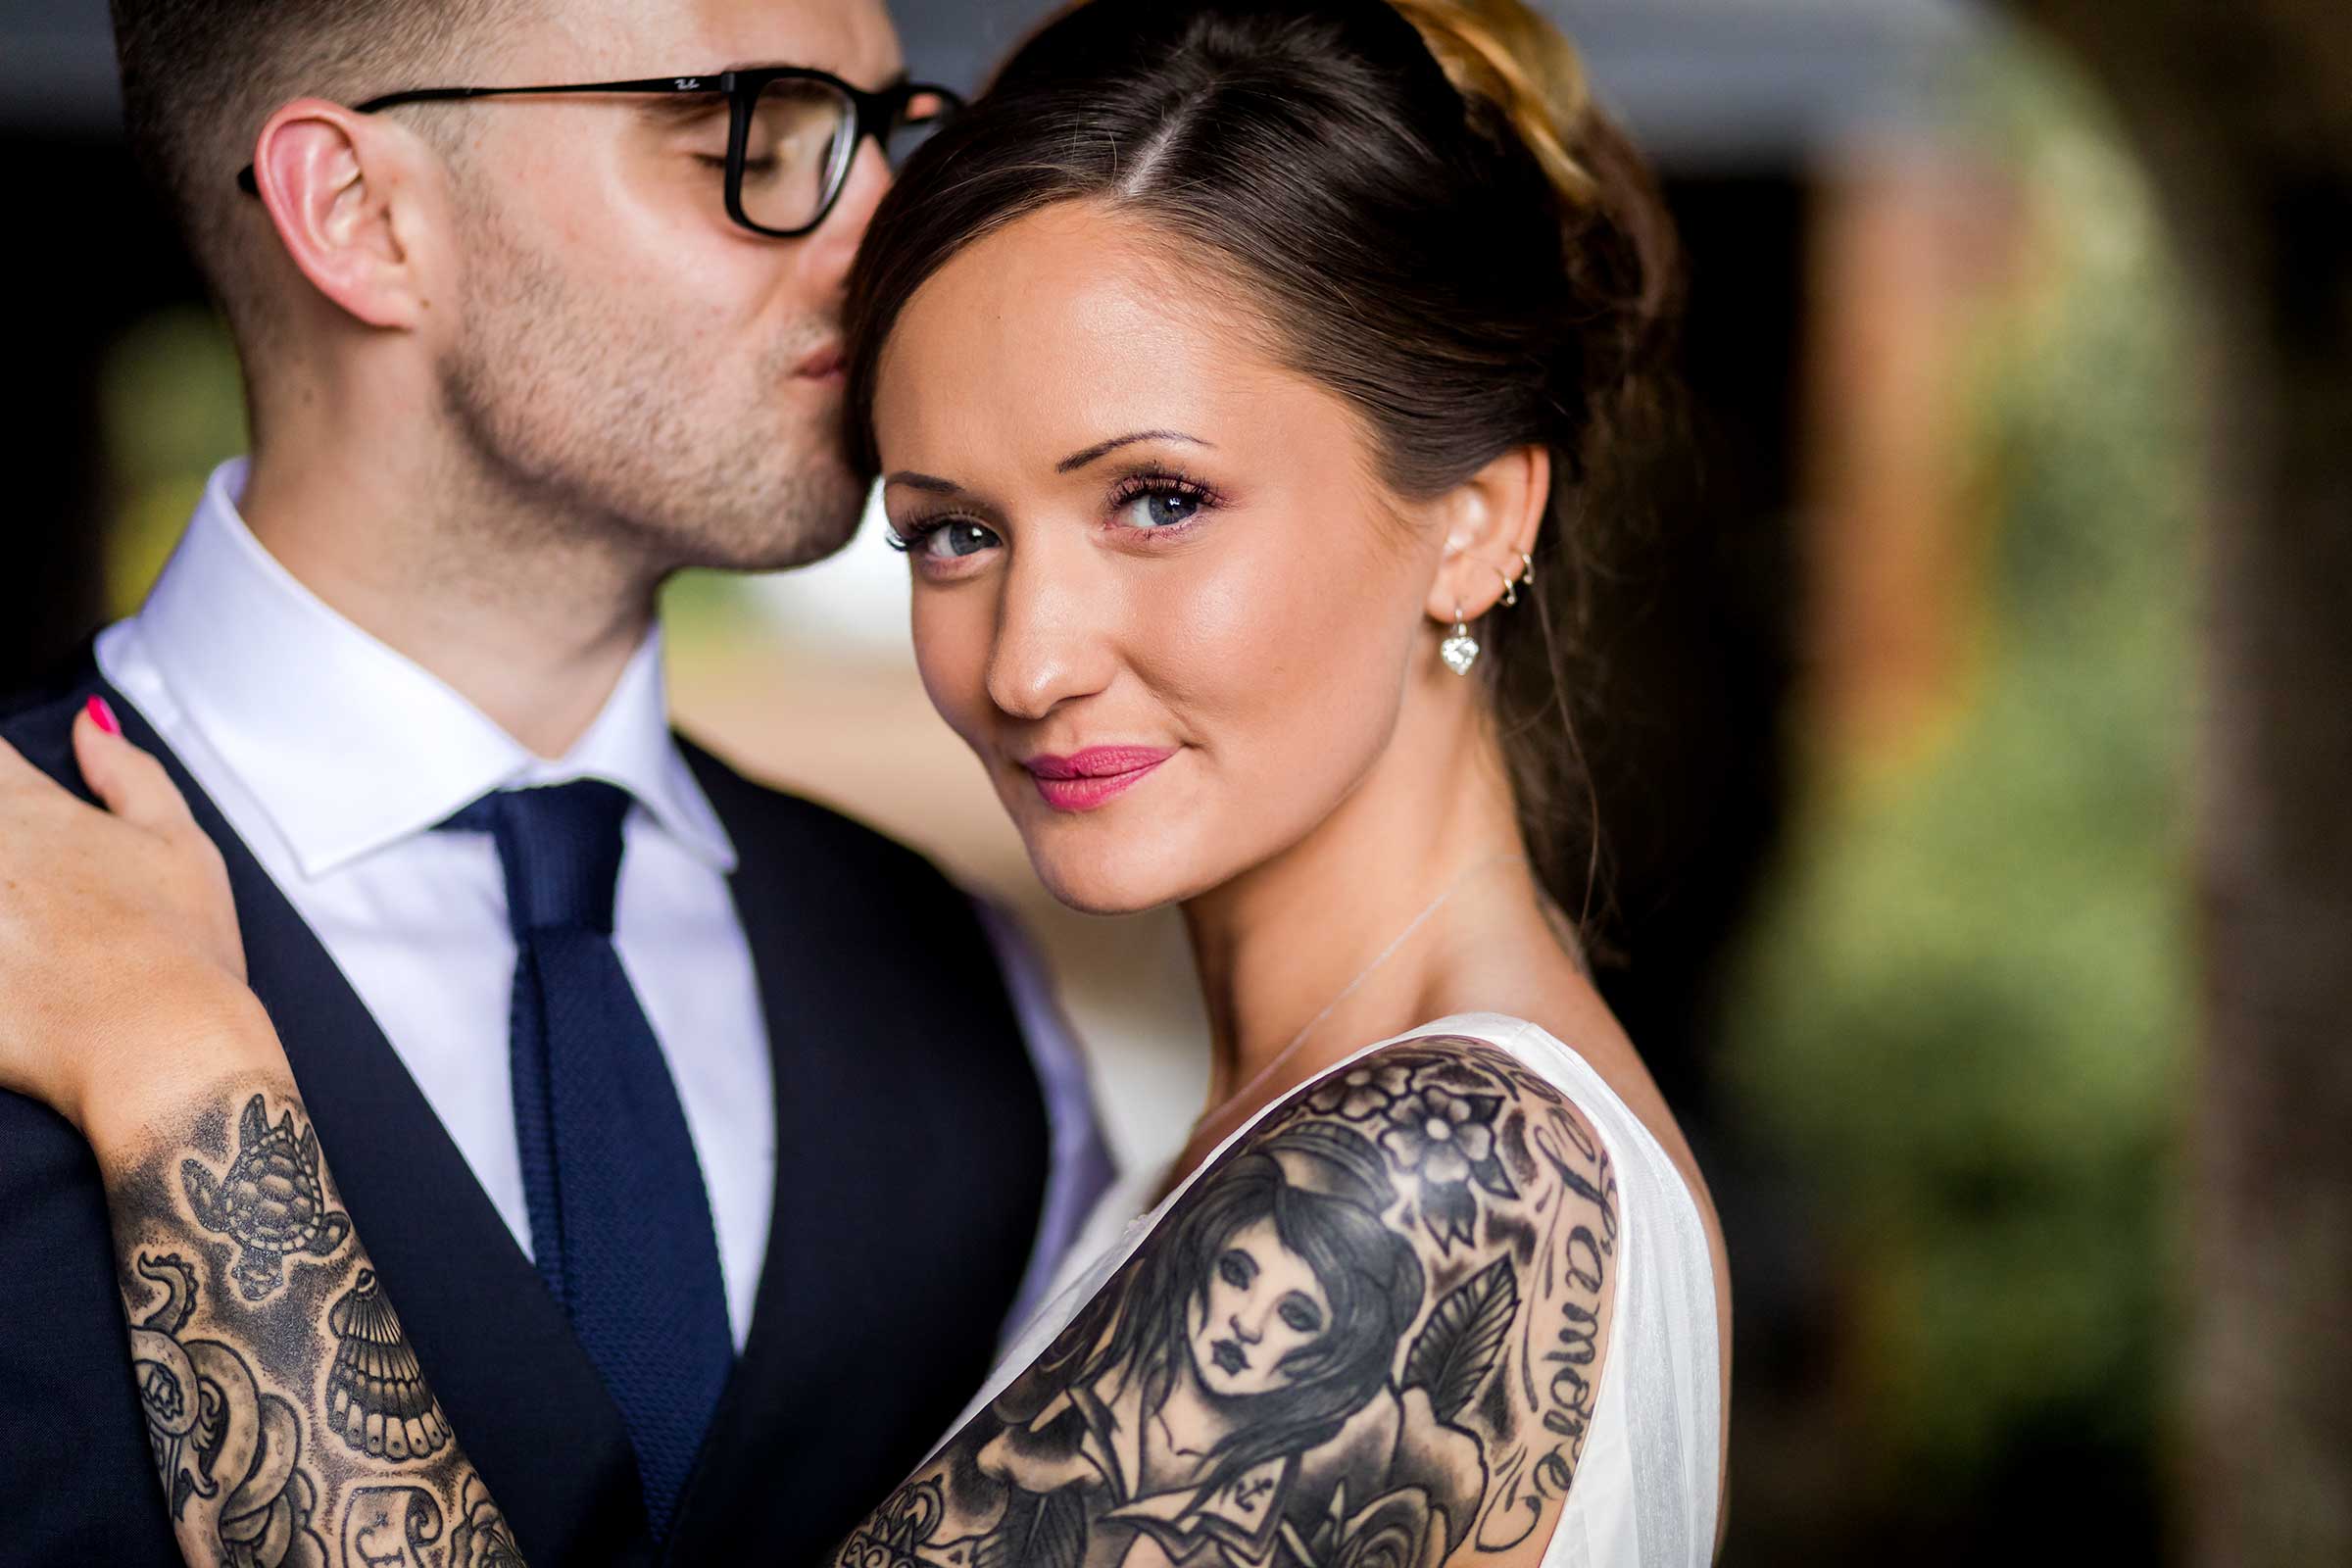 Bride with Tattoos - Wedding Photographer Newport, South Wales